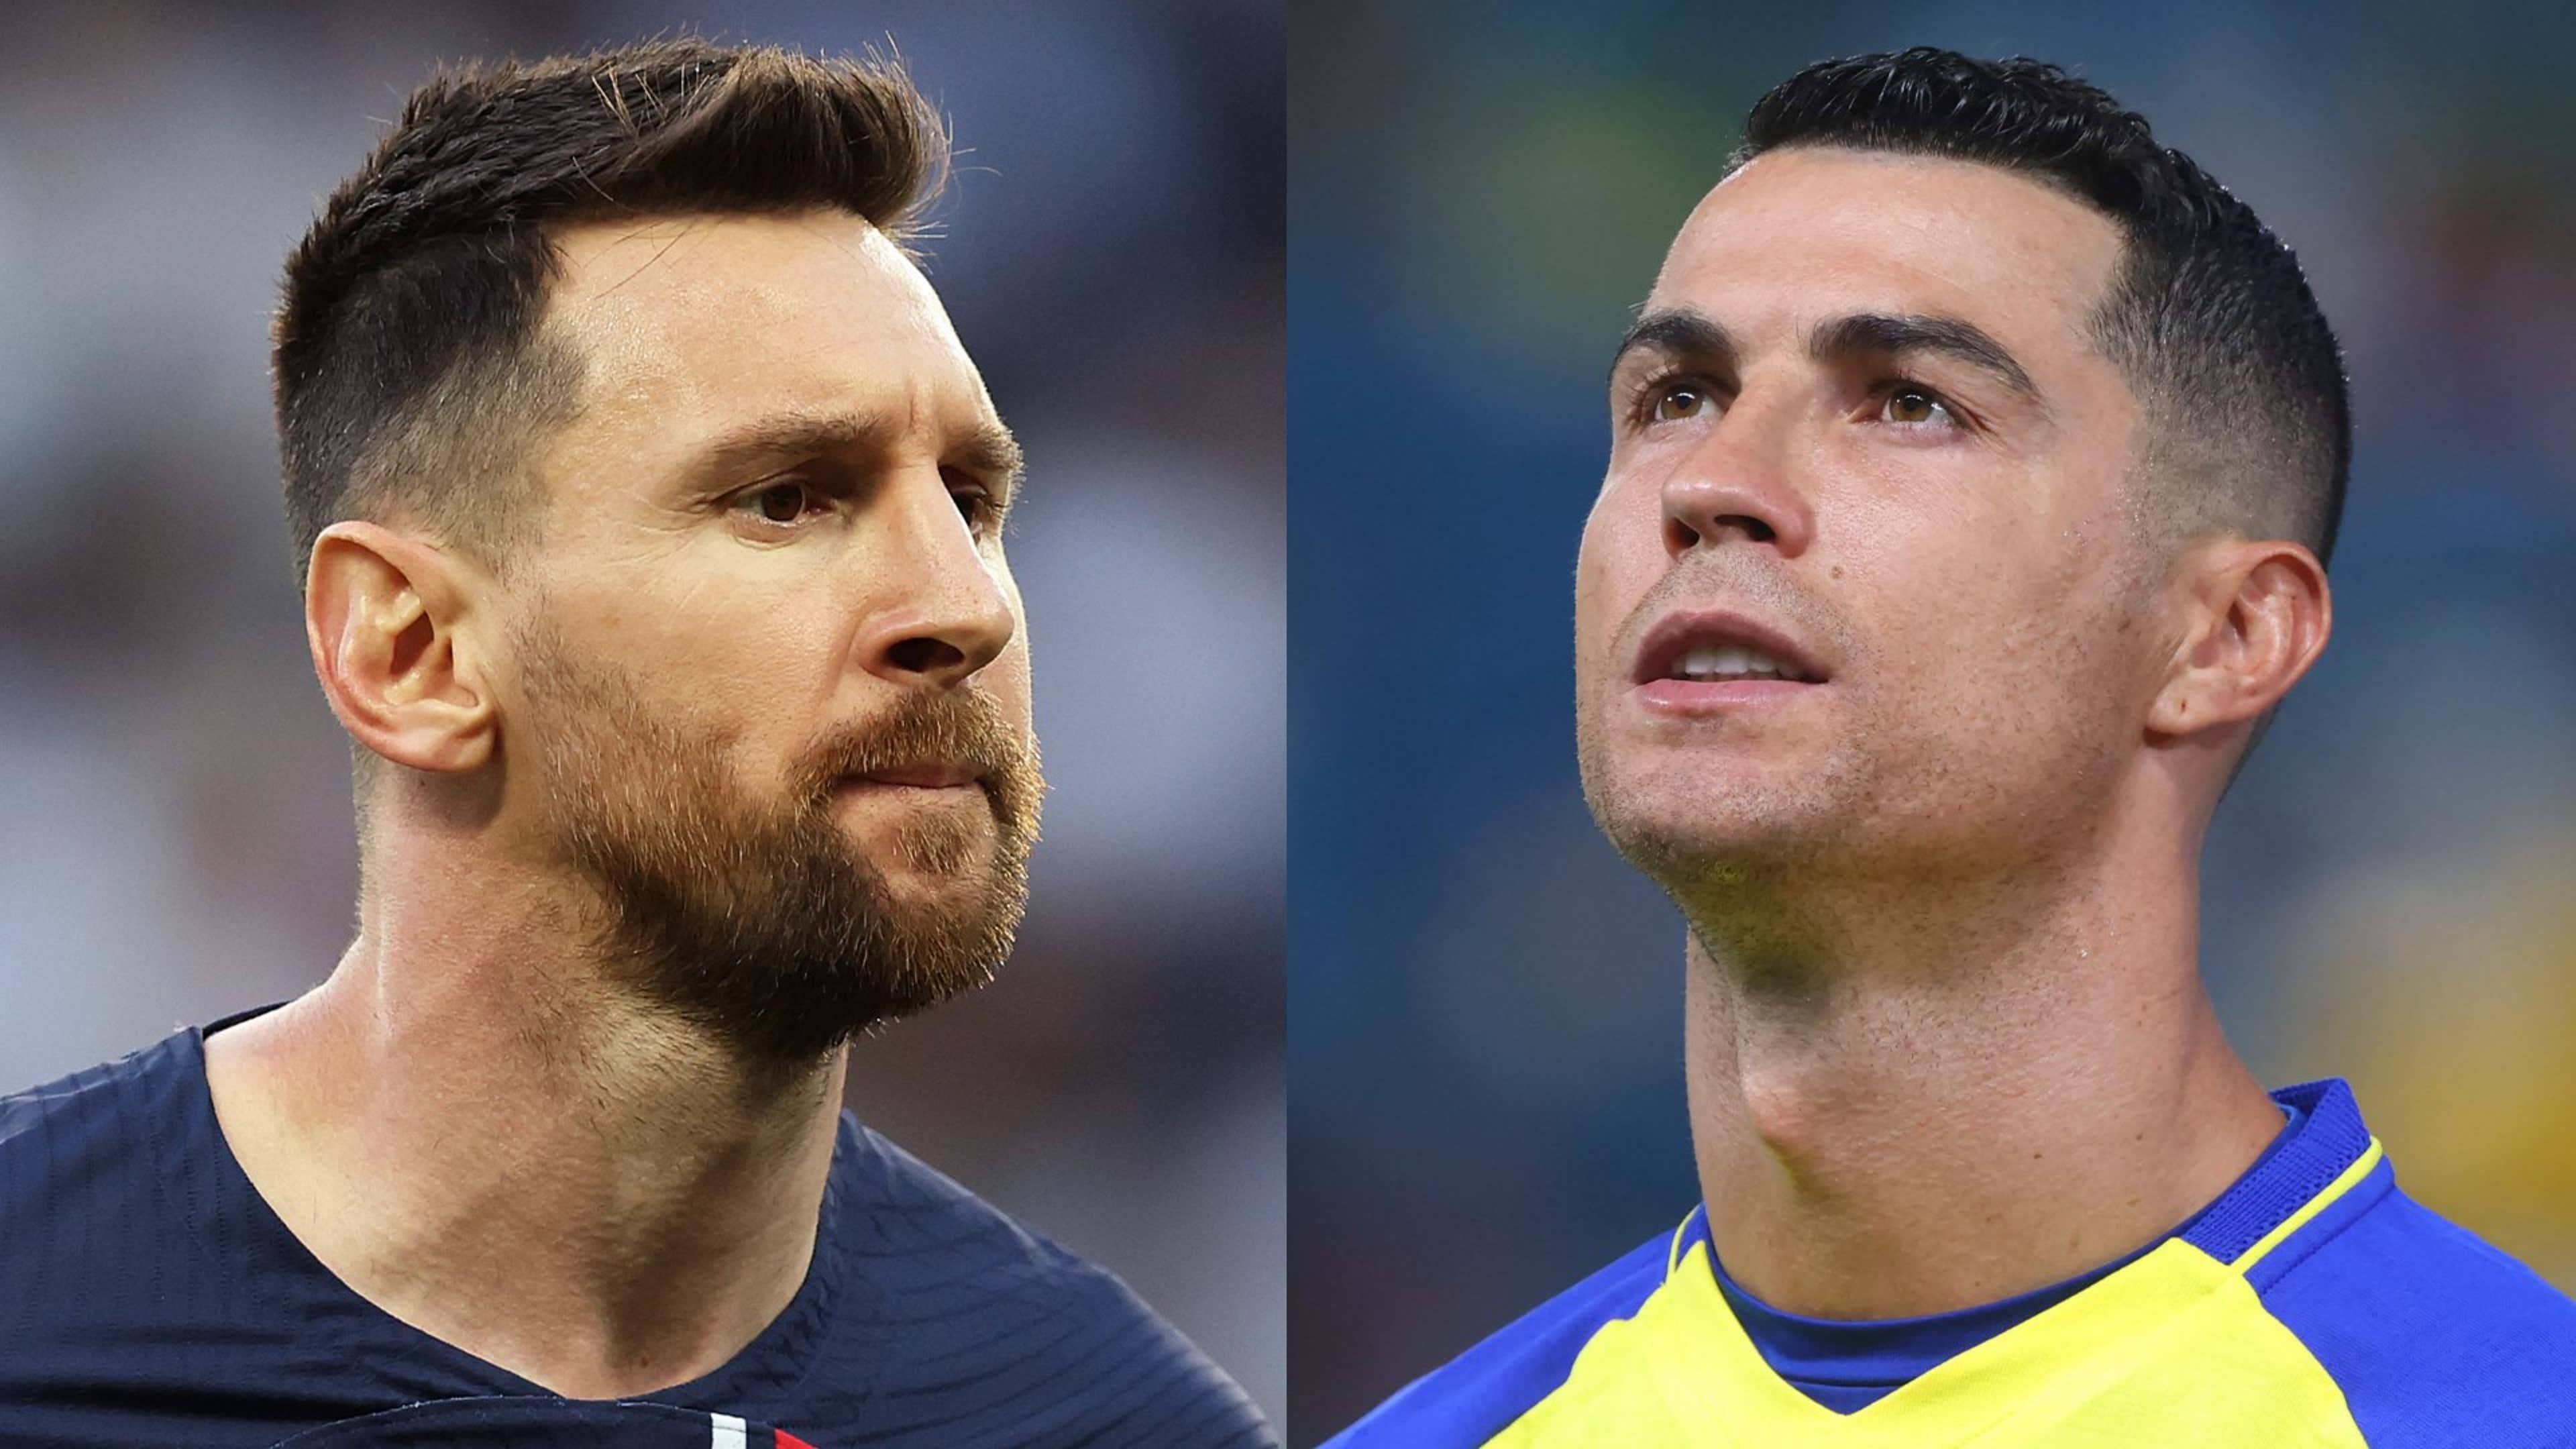 Cristiano Ronaldo primed to make debut in Middle East debut and could face  Lionel Messi - how did he get here?, Football News